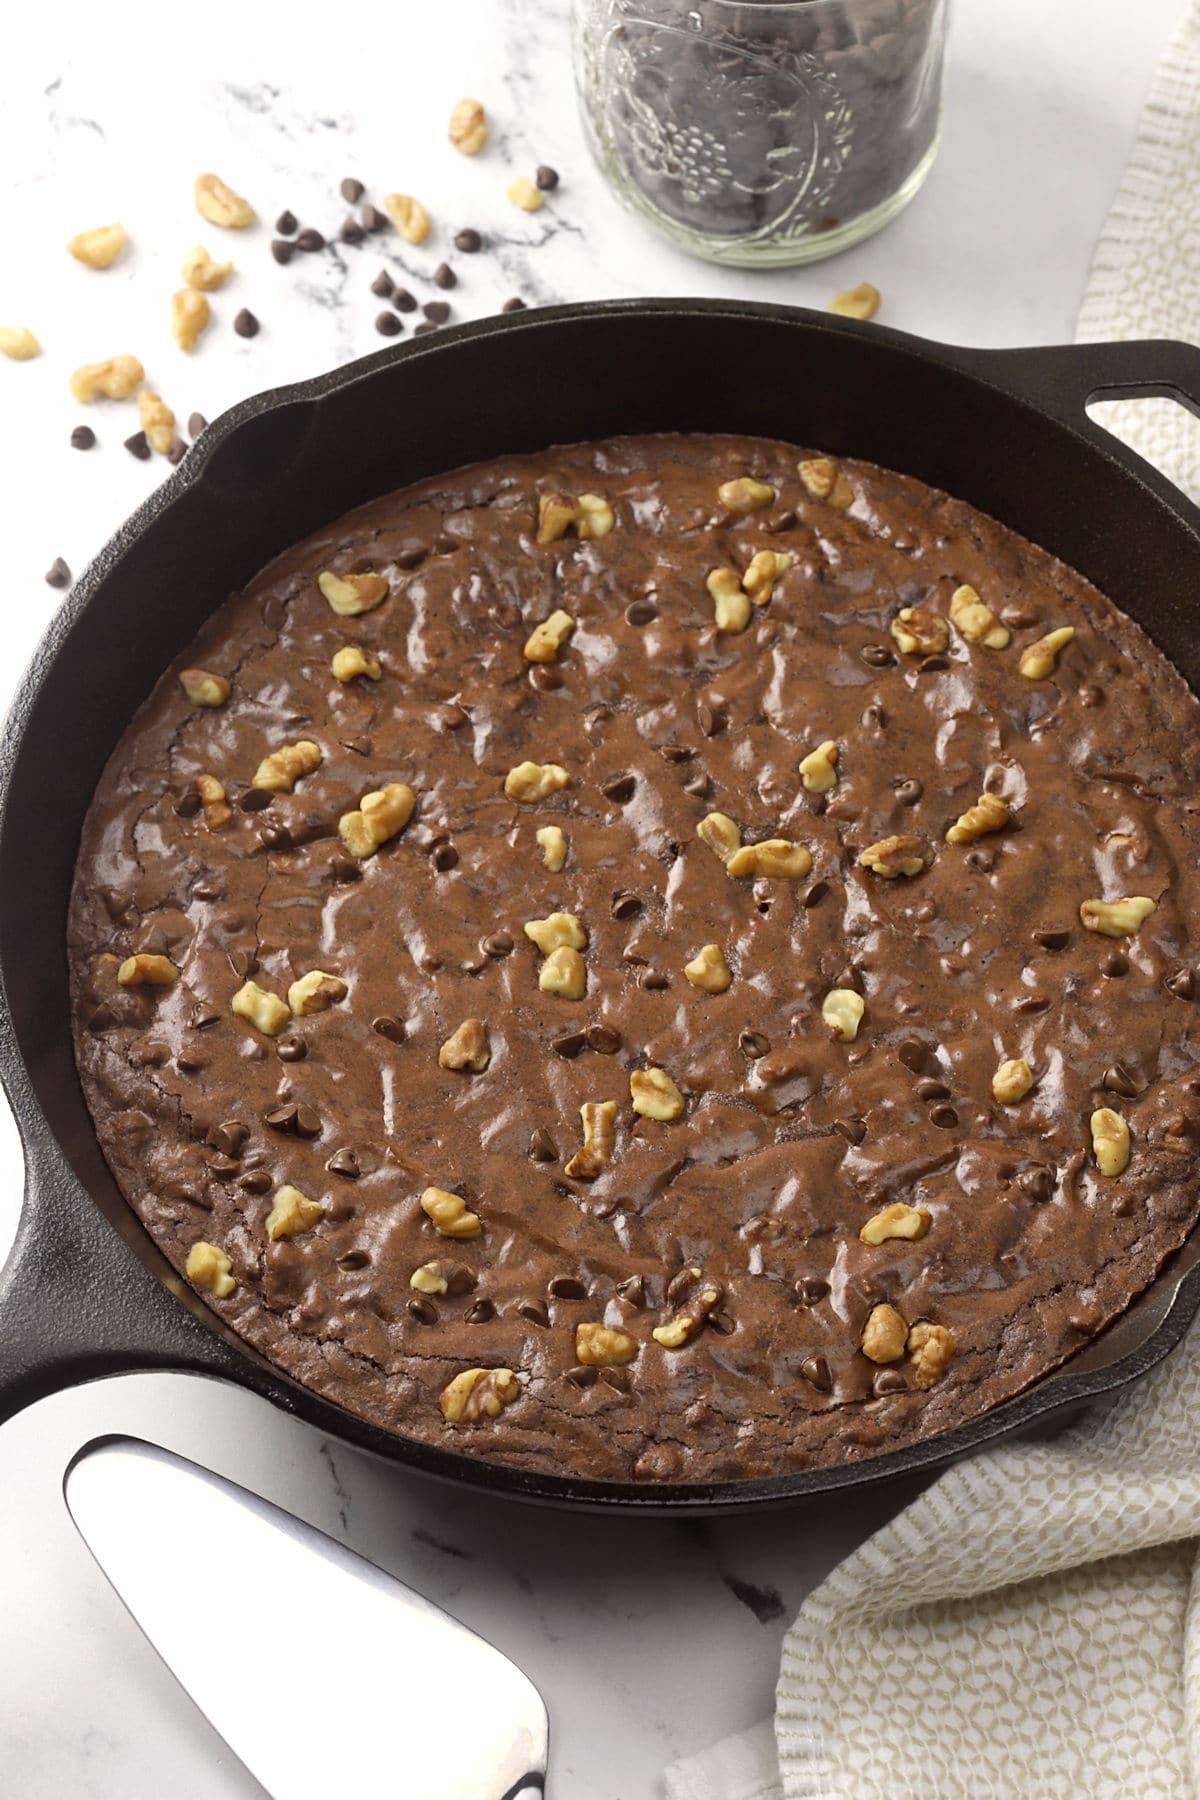 Cast iron pan filled with walnut brownies.